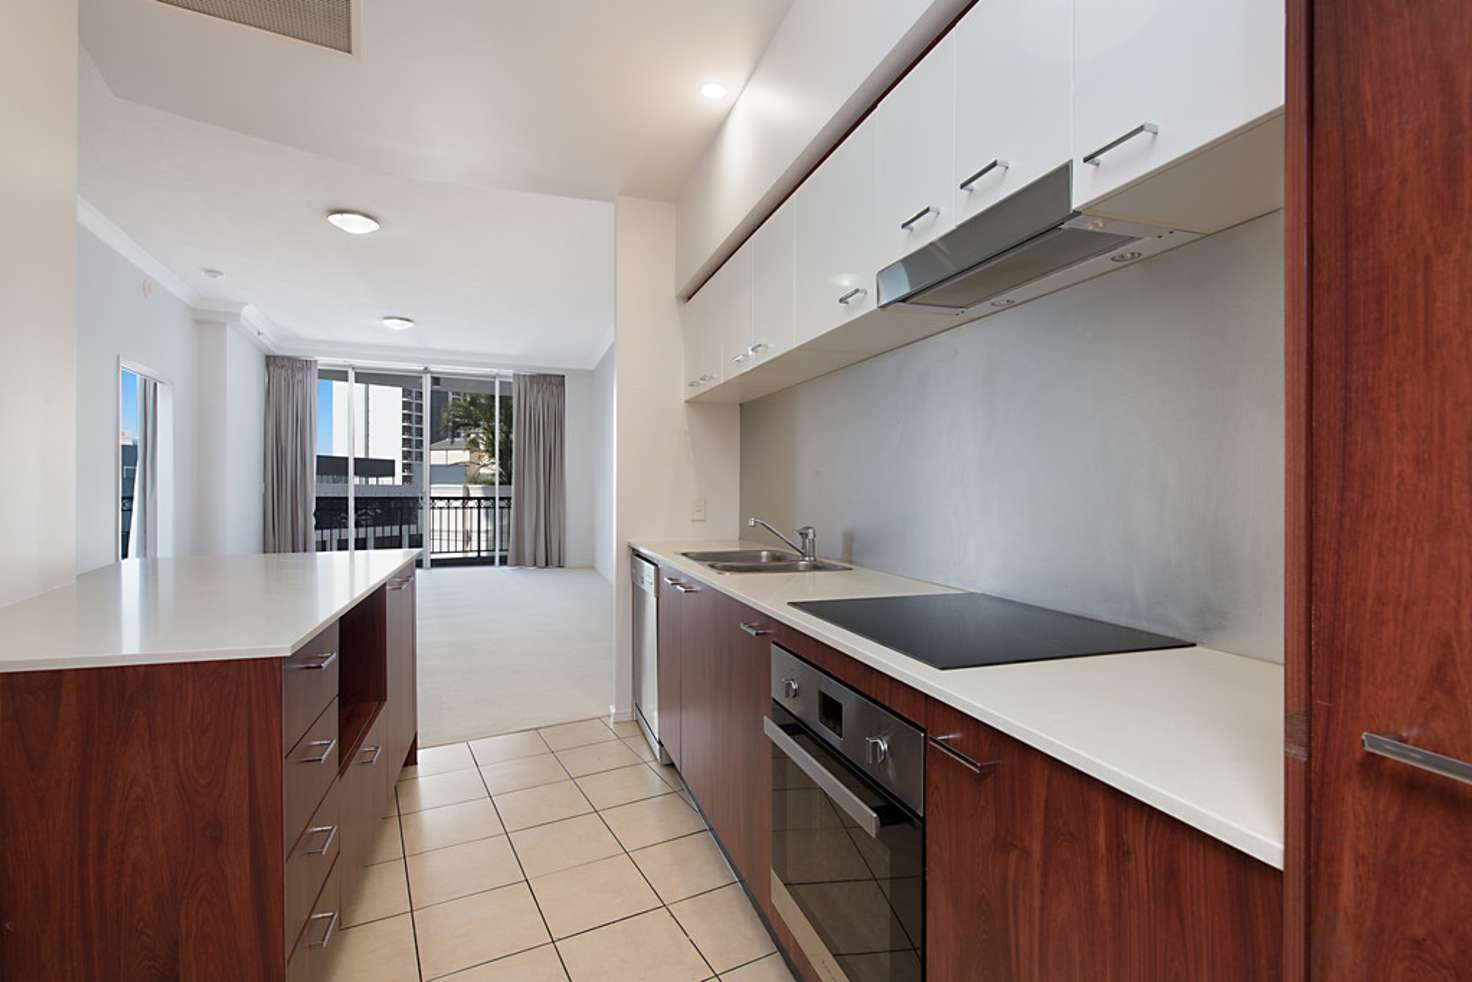 Main view of Homely unit listing, 23 Ferny Ave, Surfers Paradise QLD 4217